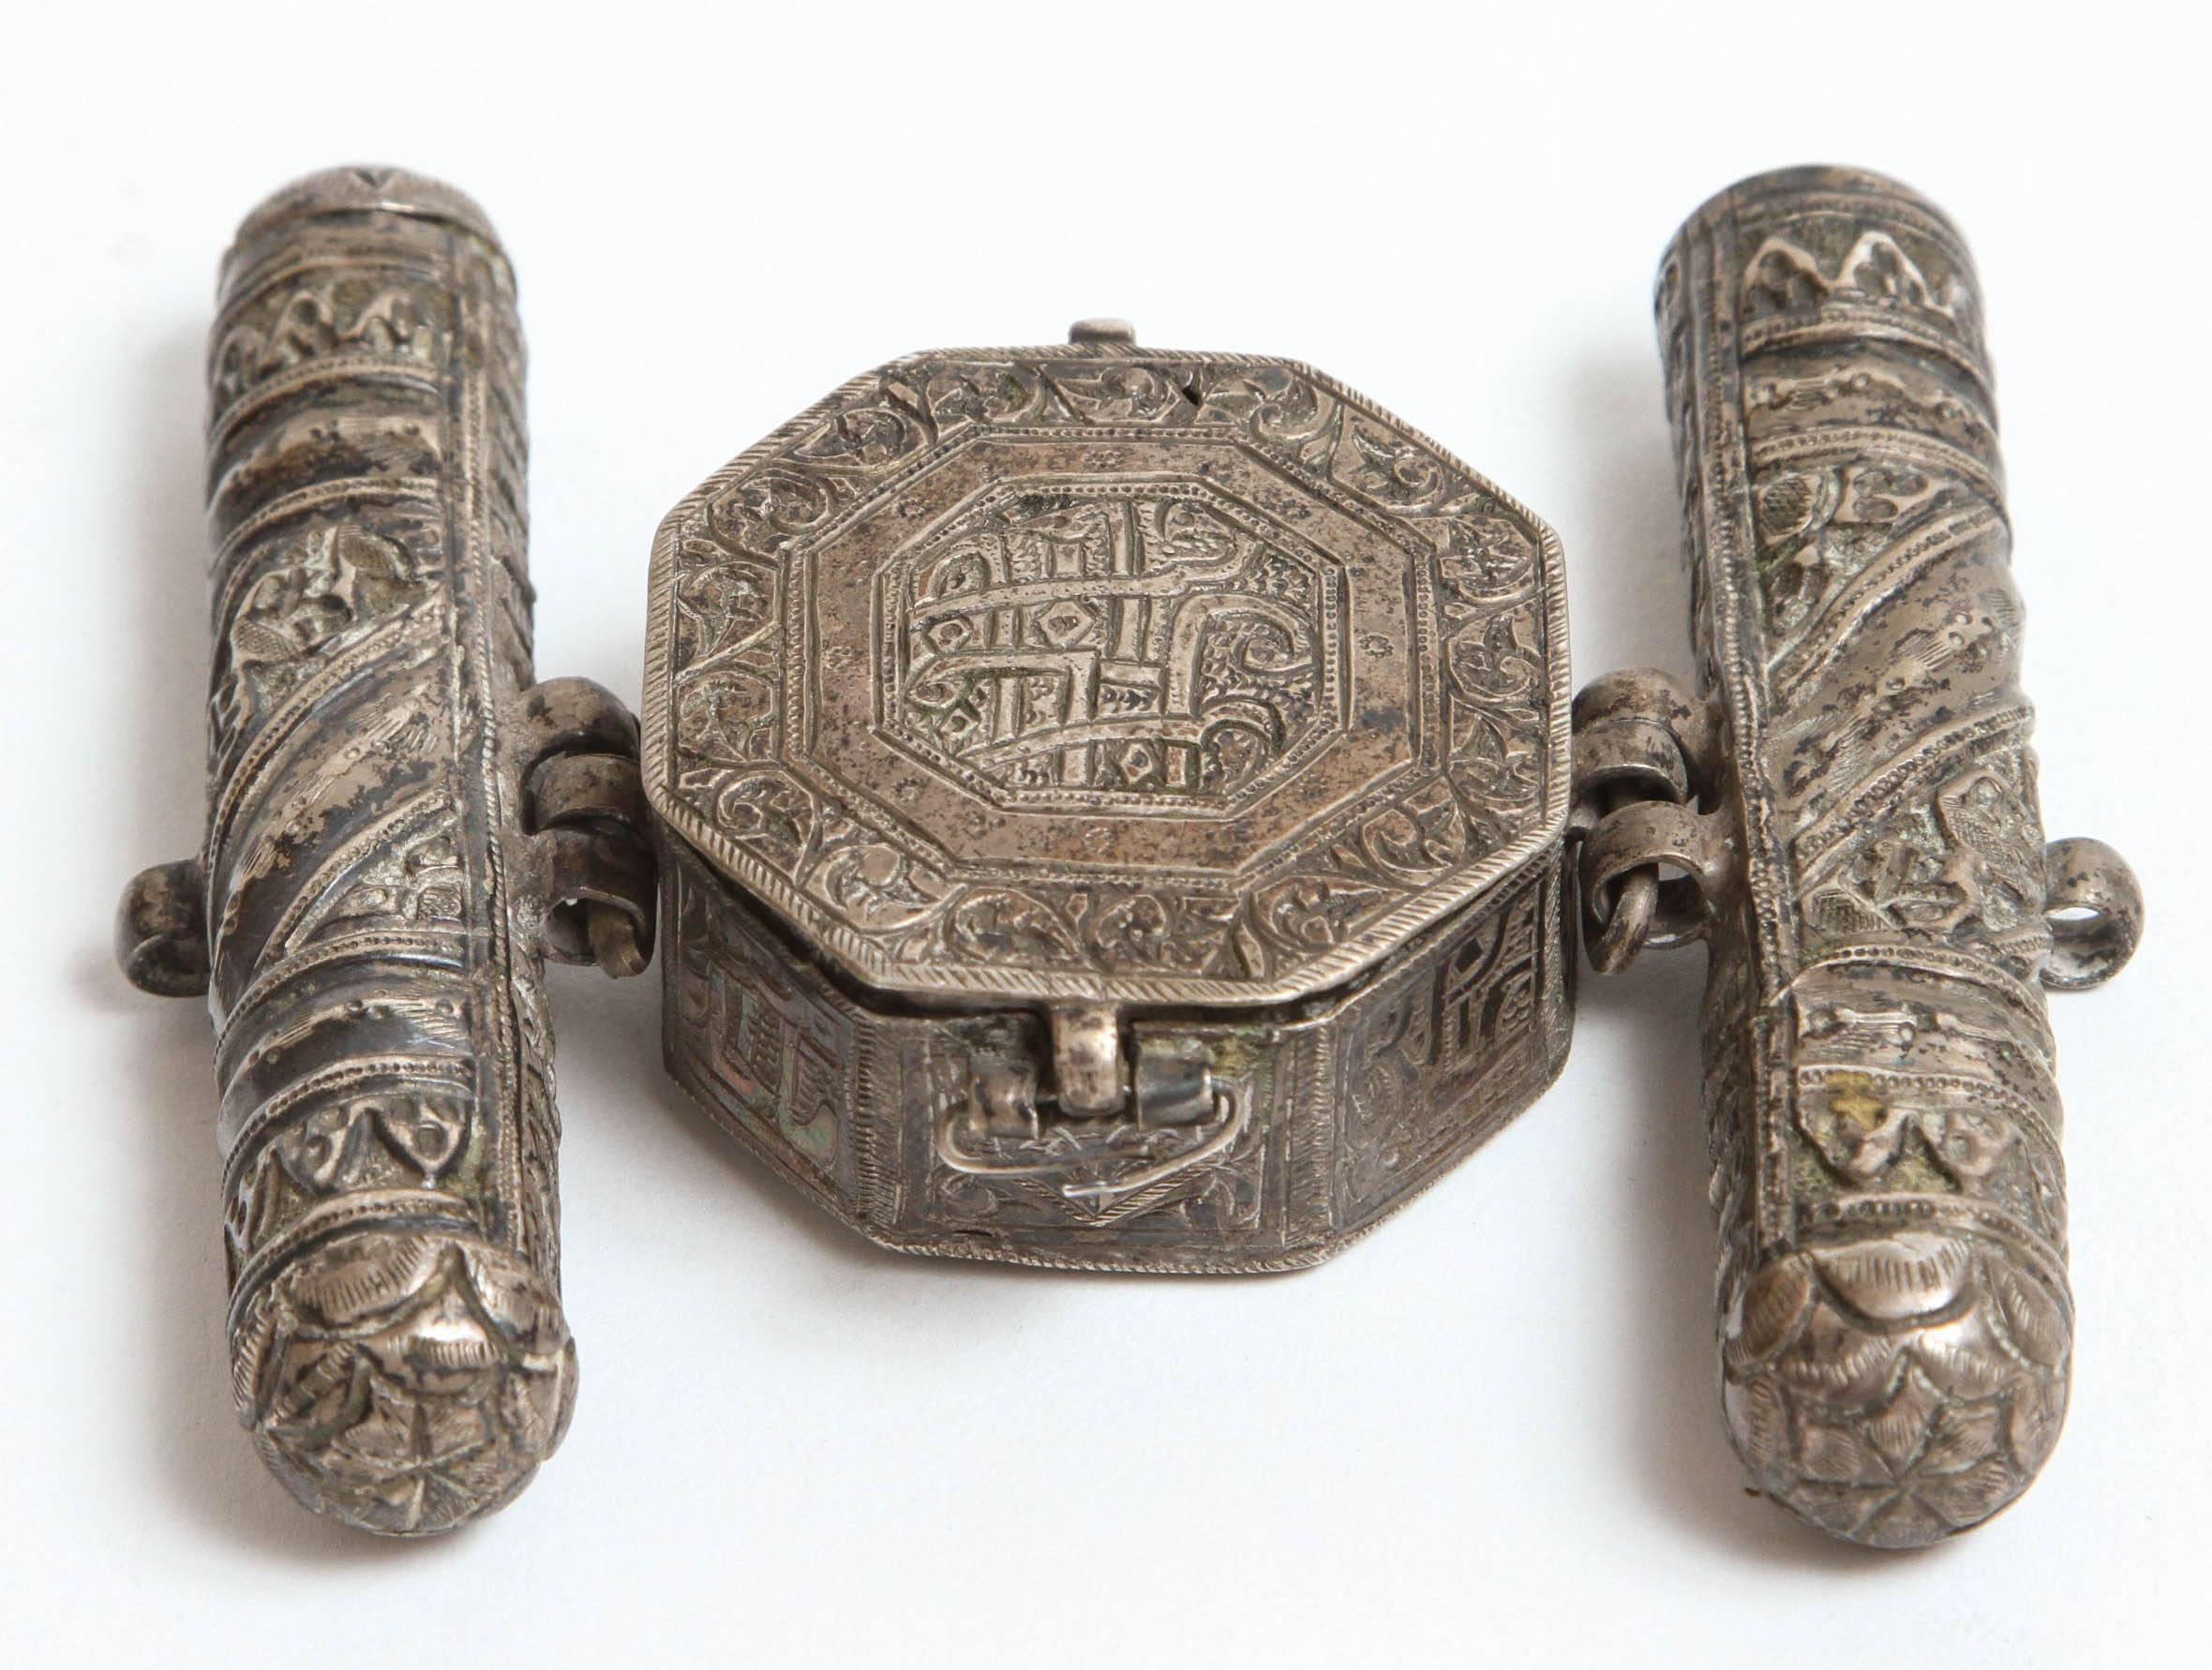 Hand-Carved 19th Century Silver Repousse Islamic Talisman Miniature Holder